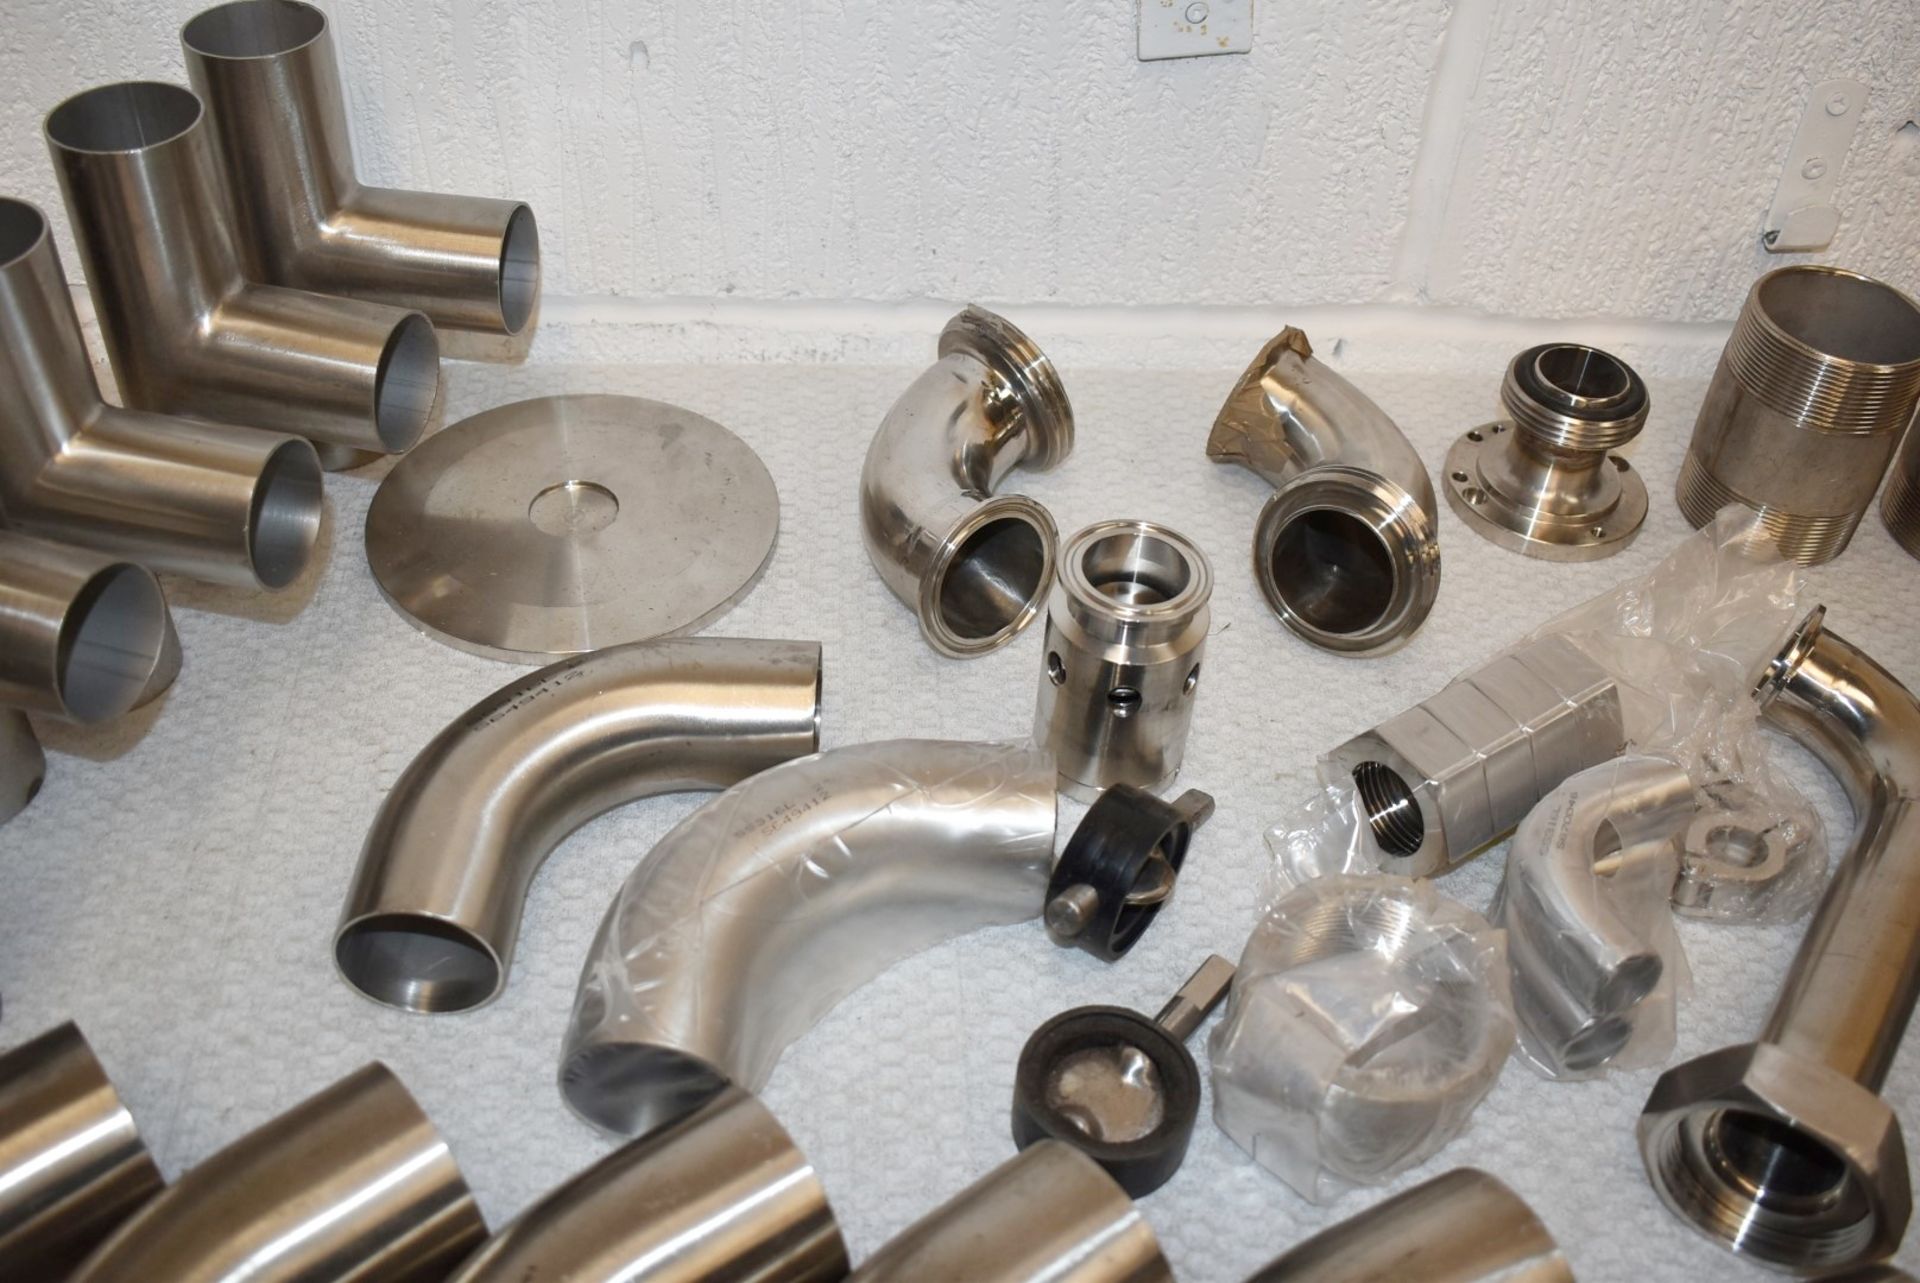 Assorted Job Lot of Stainless Steel Fittings For Brewery Equipment - Includes Approx 38 Pieces - - Image 3 of 13